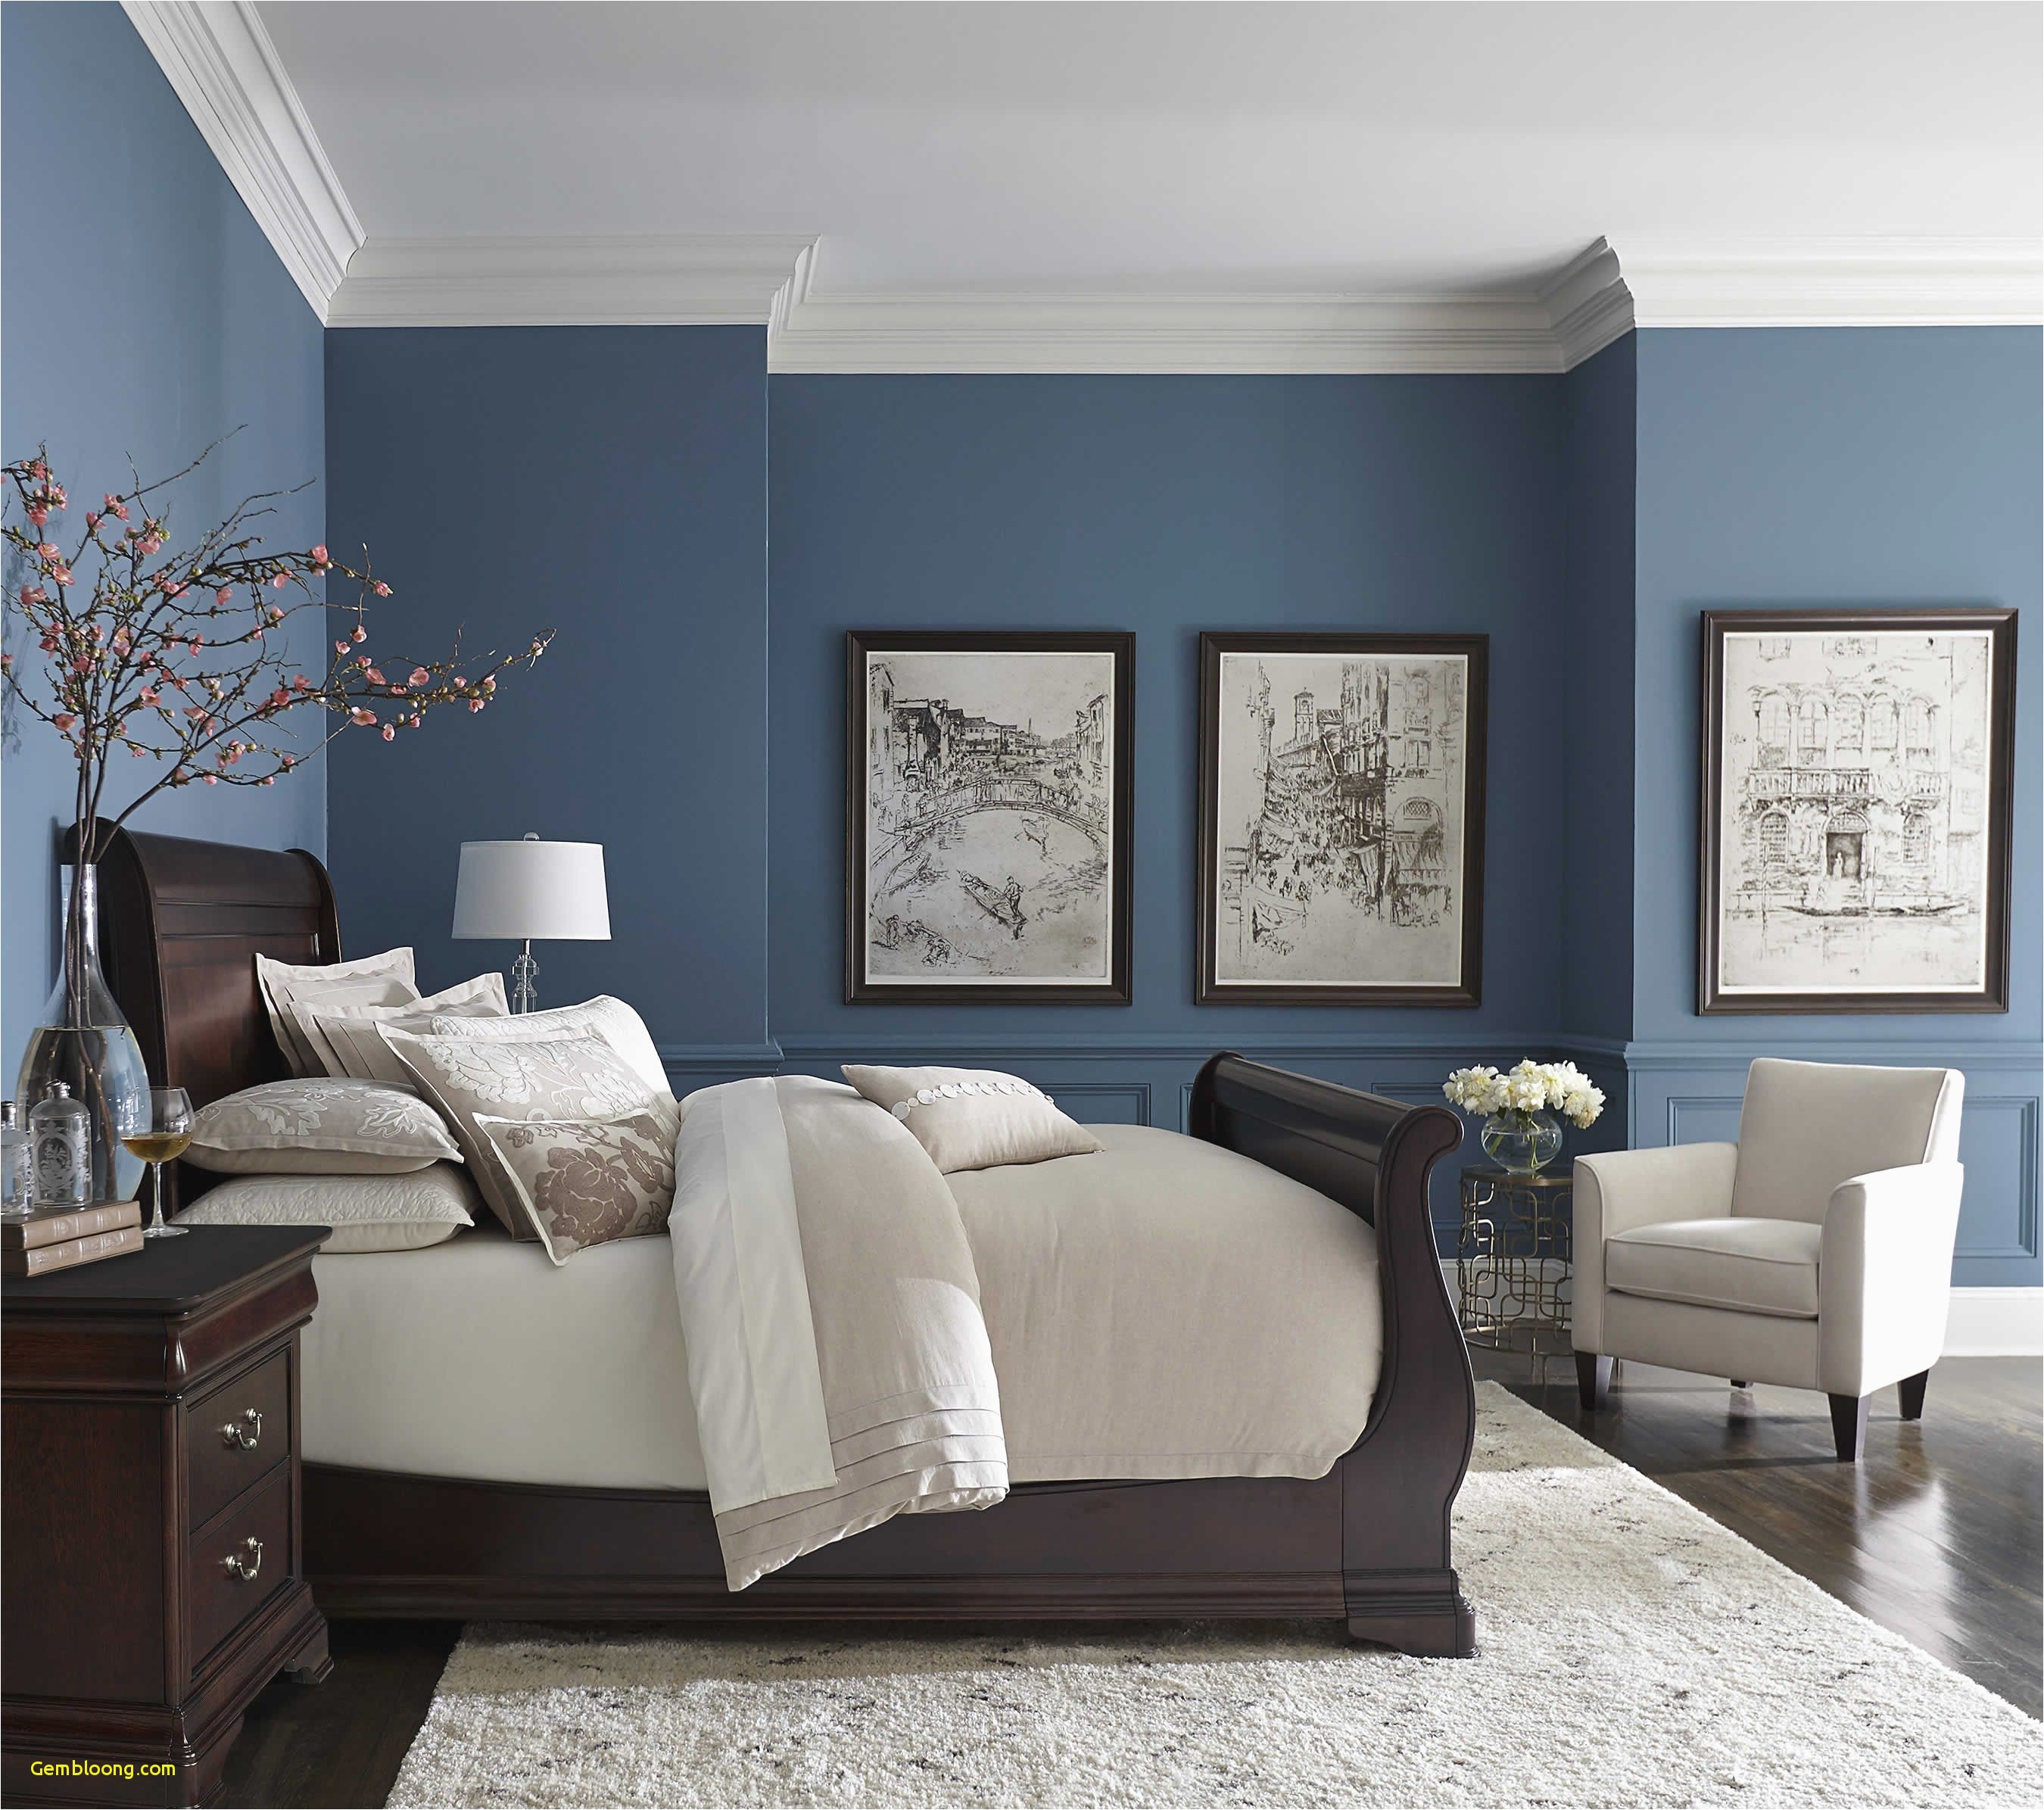 Nice Bedroom Paint Colors 30 Luxury Best Paint Colors for Bedrooms Nice